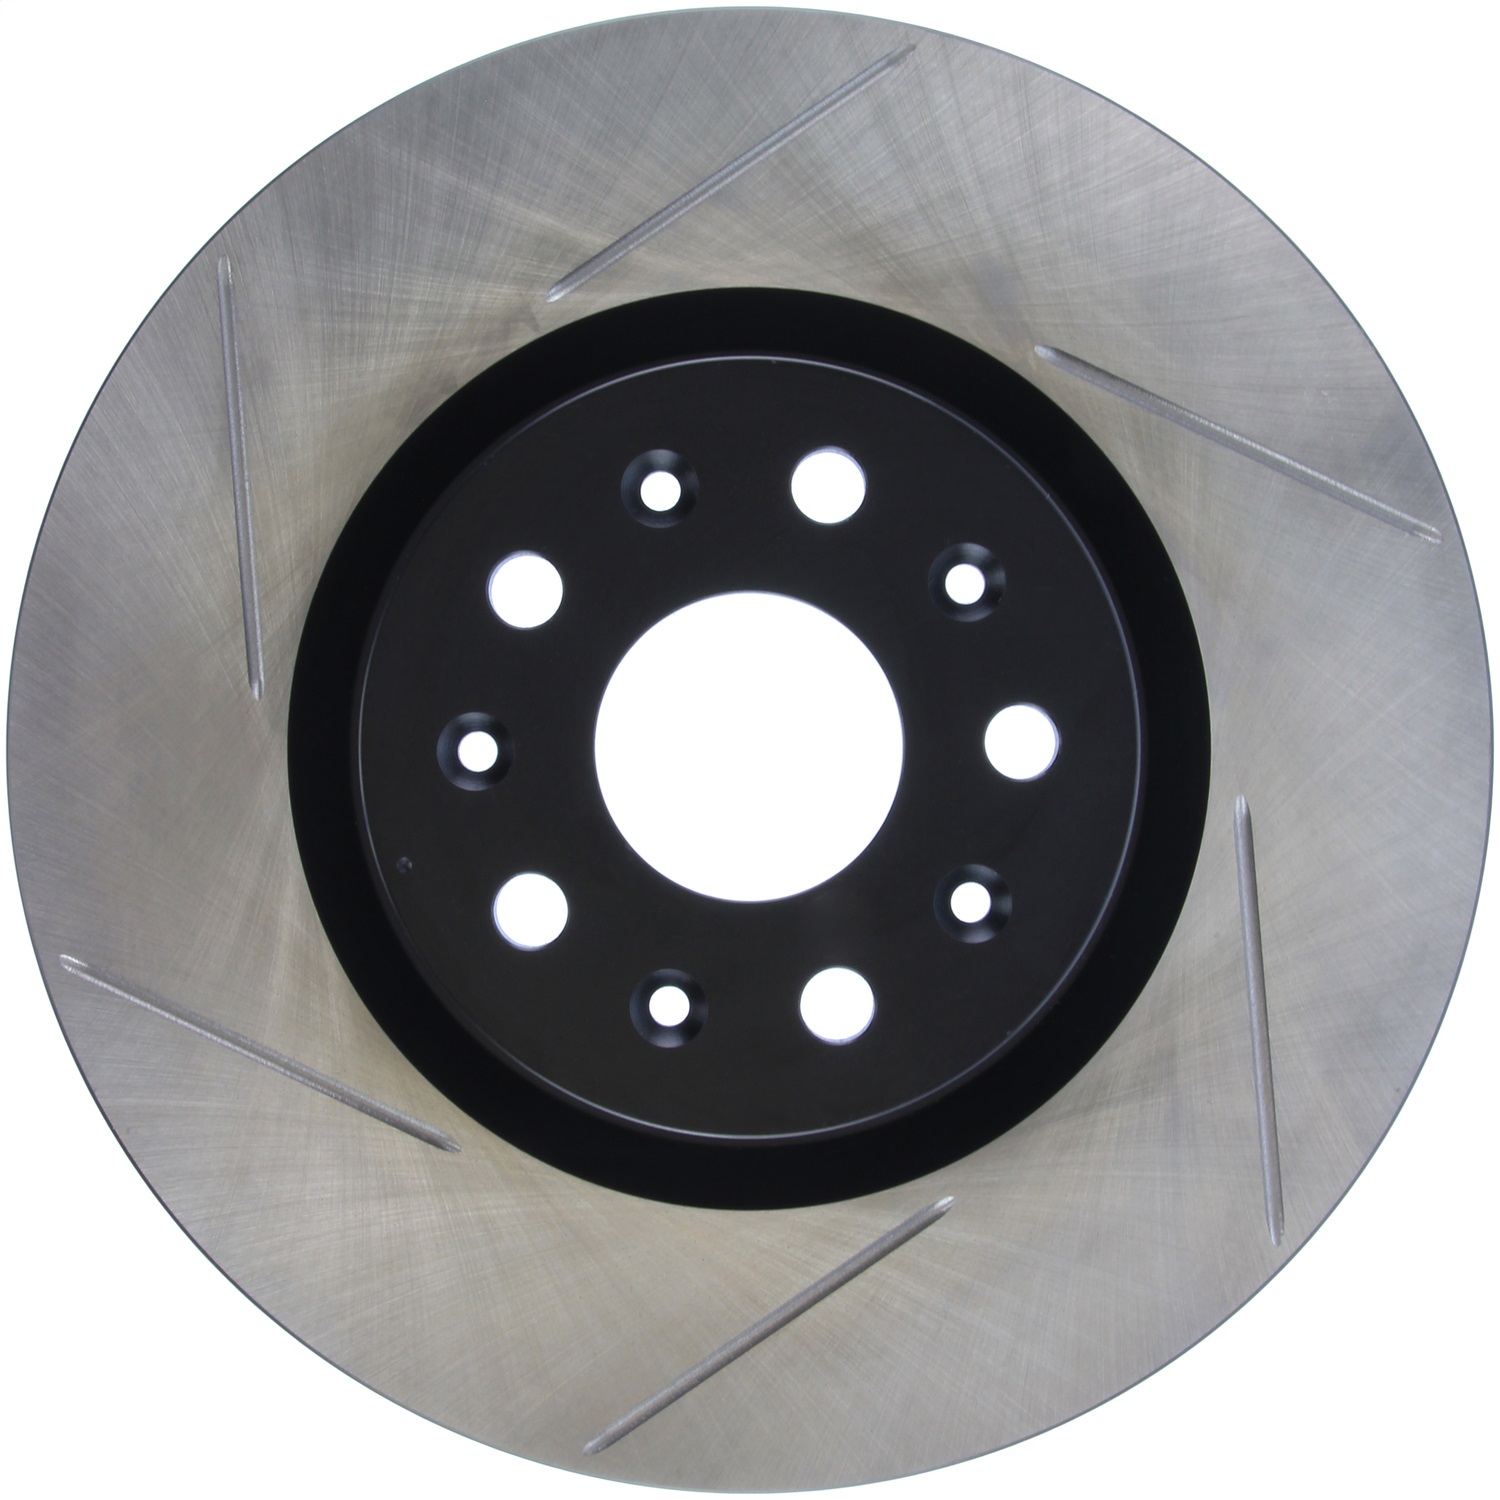 StopTech 126.62150SR Sport Slotted Disc Brake Rotor Fits Camaro CT5 CT6 CTS